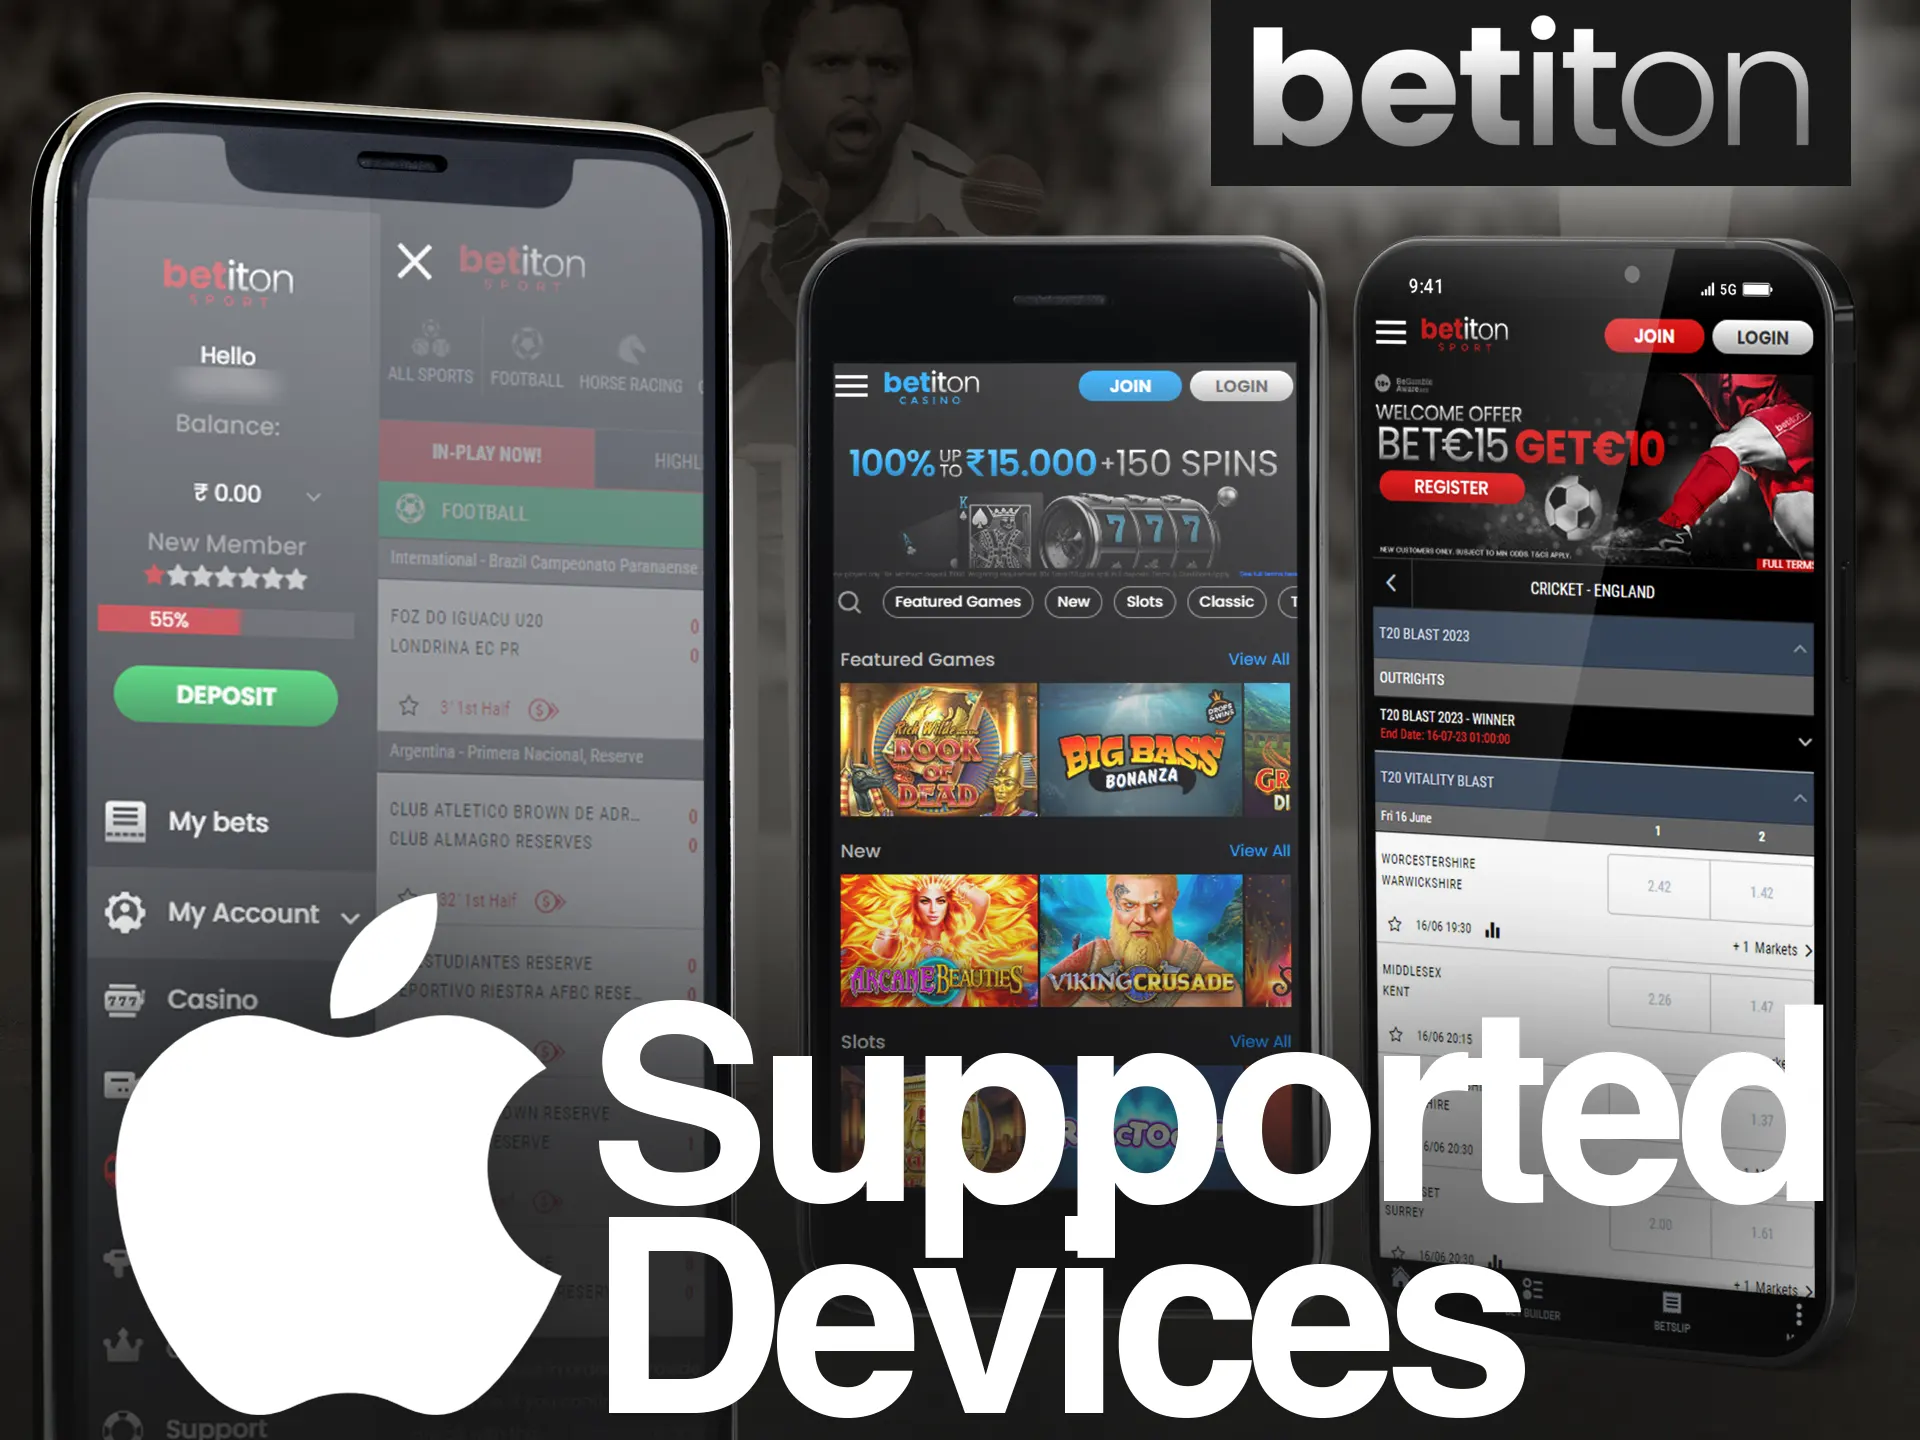 Install the Betiton iOS app on all of your devices.